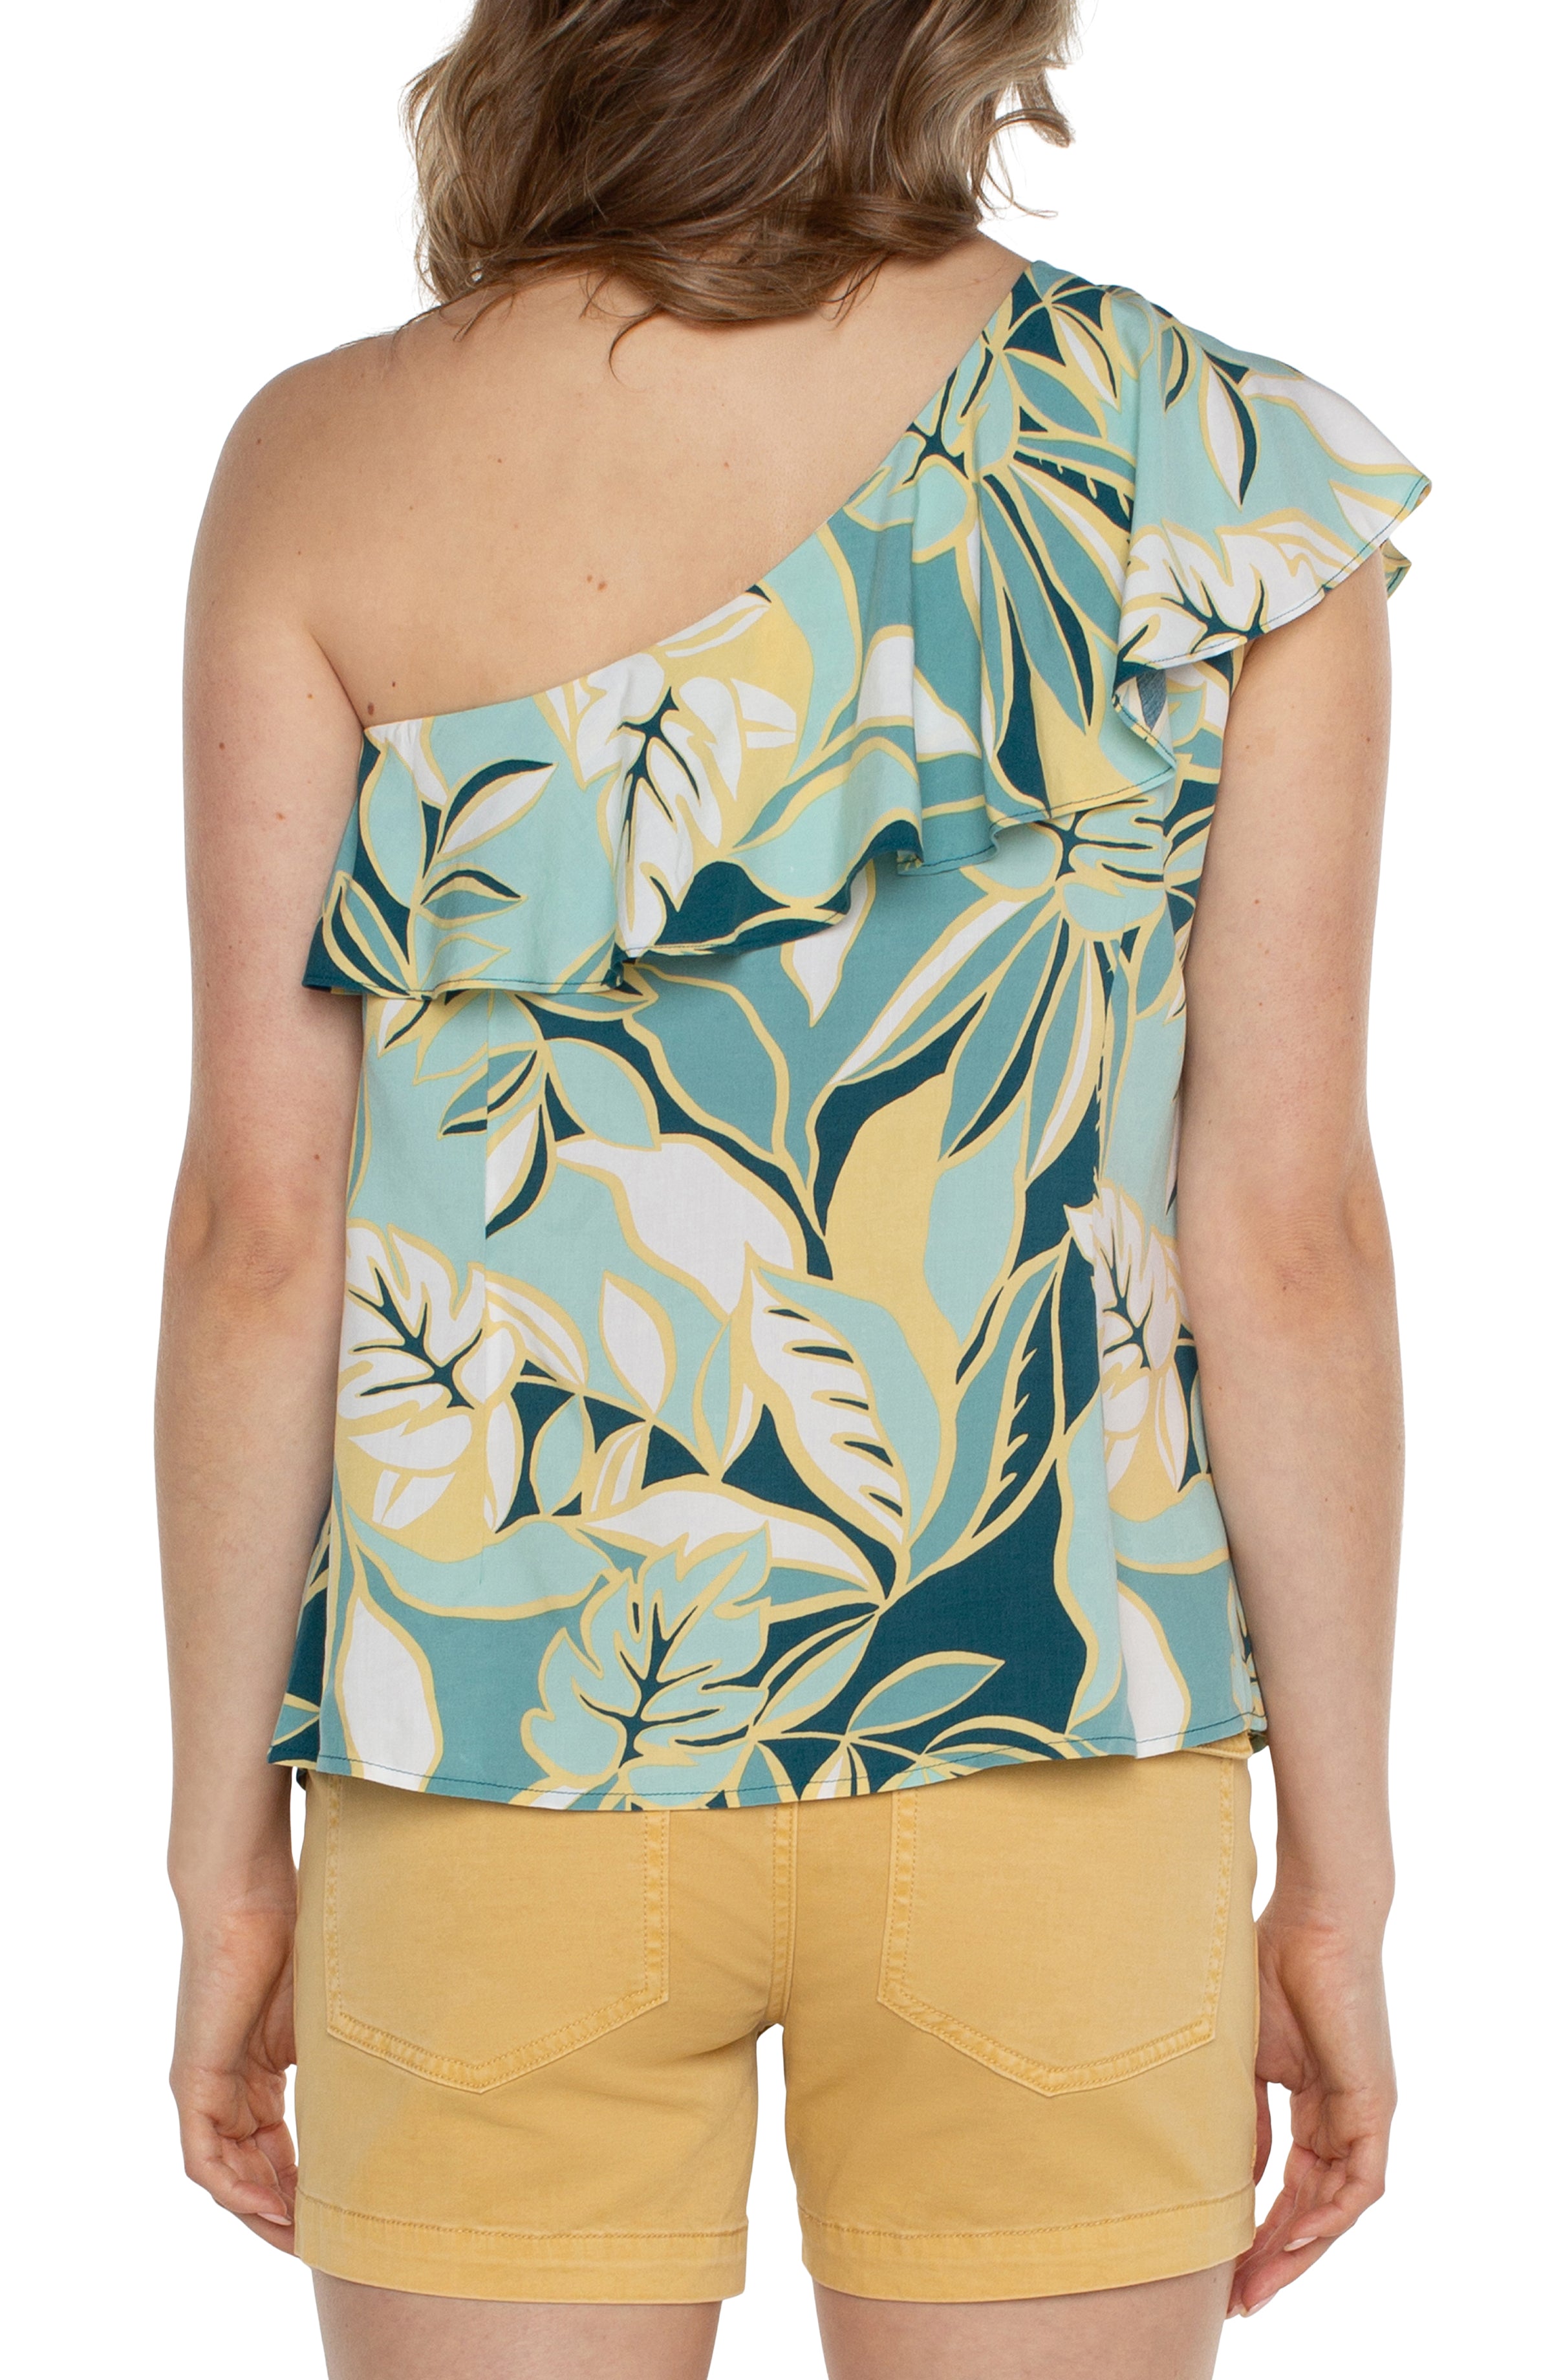 LVP One Shoulder Ruffle Print - Teal Tropical Back View